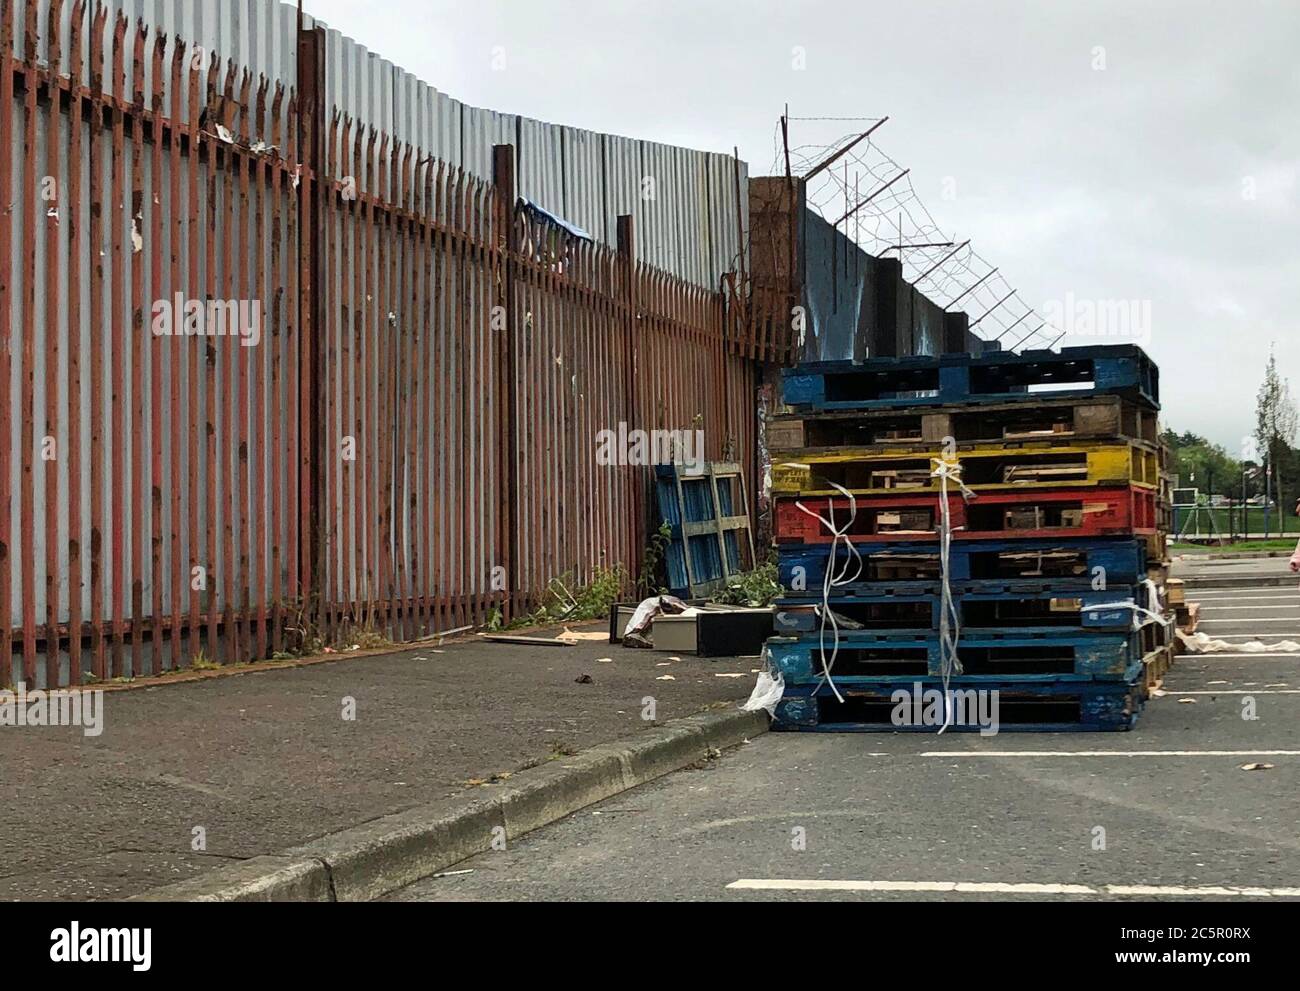 Wooden pallets at loyalist bonfire site at Bloomfield walkway car park in east Belfast. Loyalists should abandon efforts to rebuild bonfires and stick to the coronavirus regulations, an influential clergyman in east Belfast has said. Stock Photo